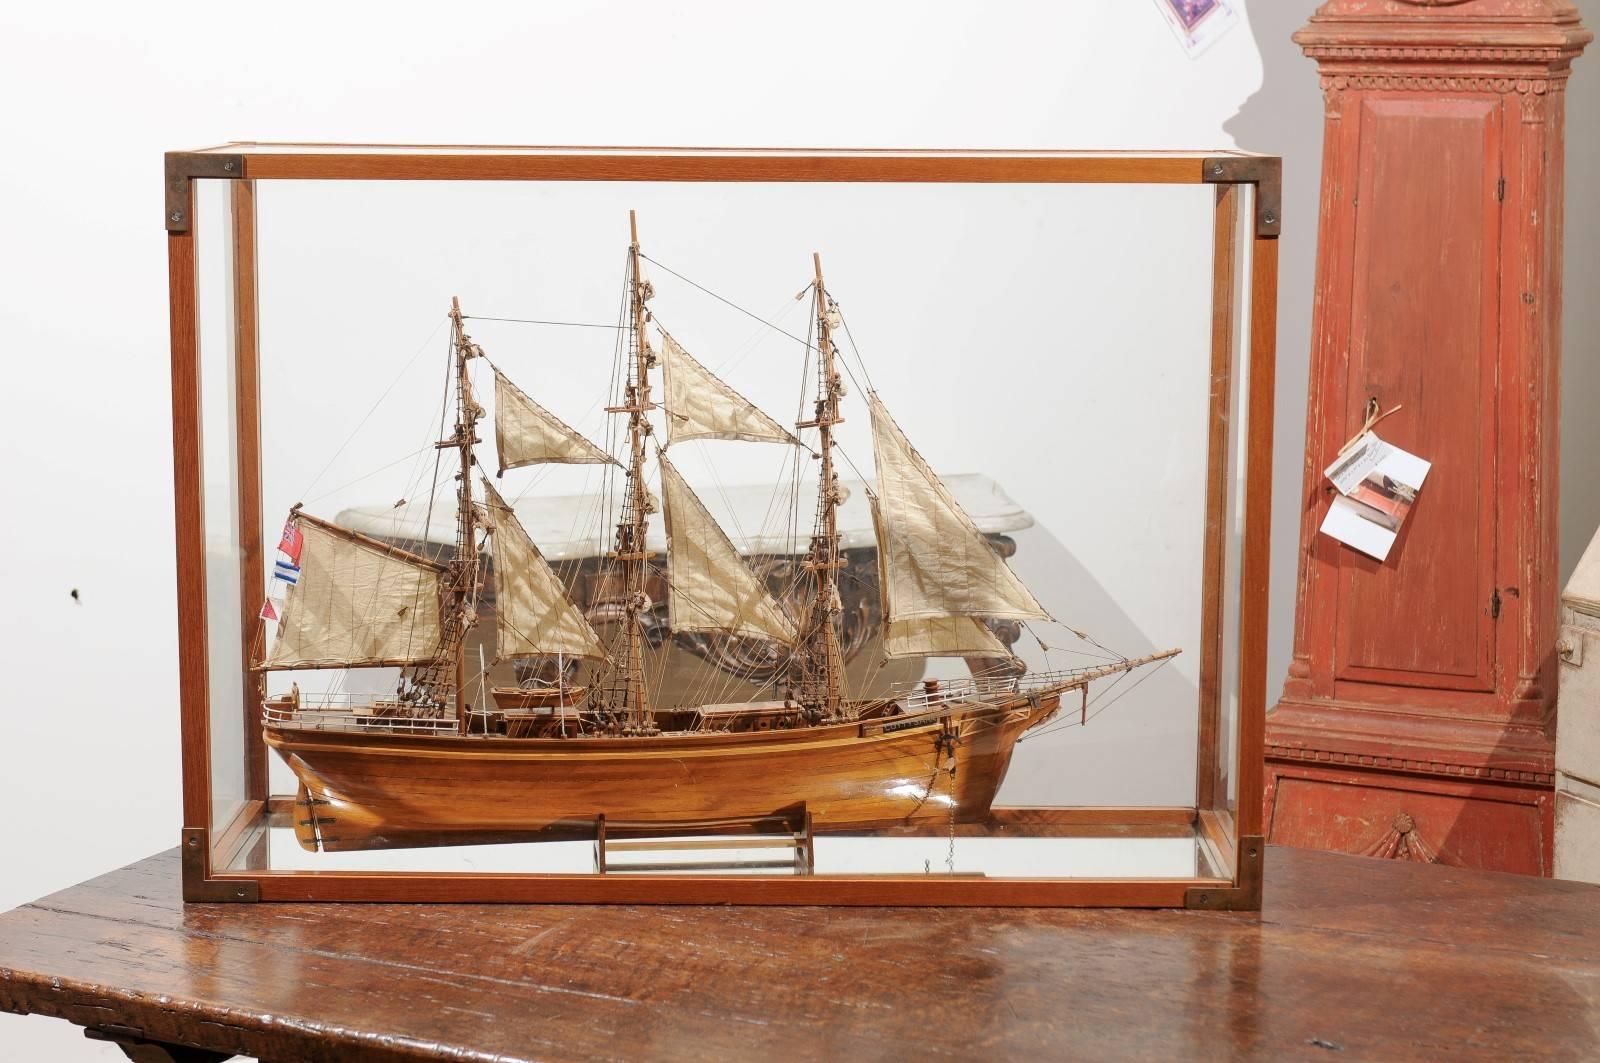 A model of the 1869 English sail powered ship Cutty Sark in a display case. This late 19th century finely detailed model of the Cutty Sark sits in a display case that showcases the extraordinary work of art the ship was. One of the last - and